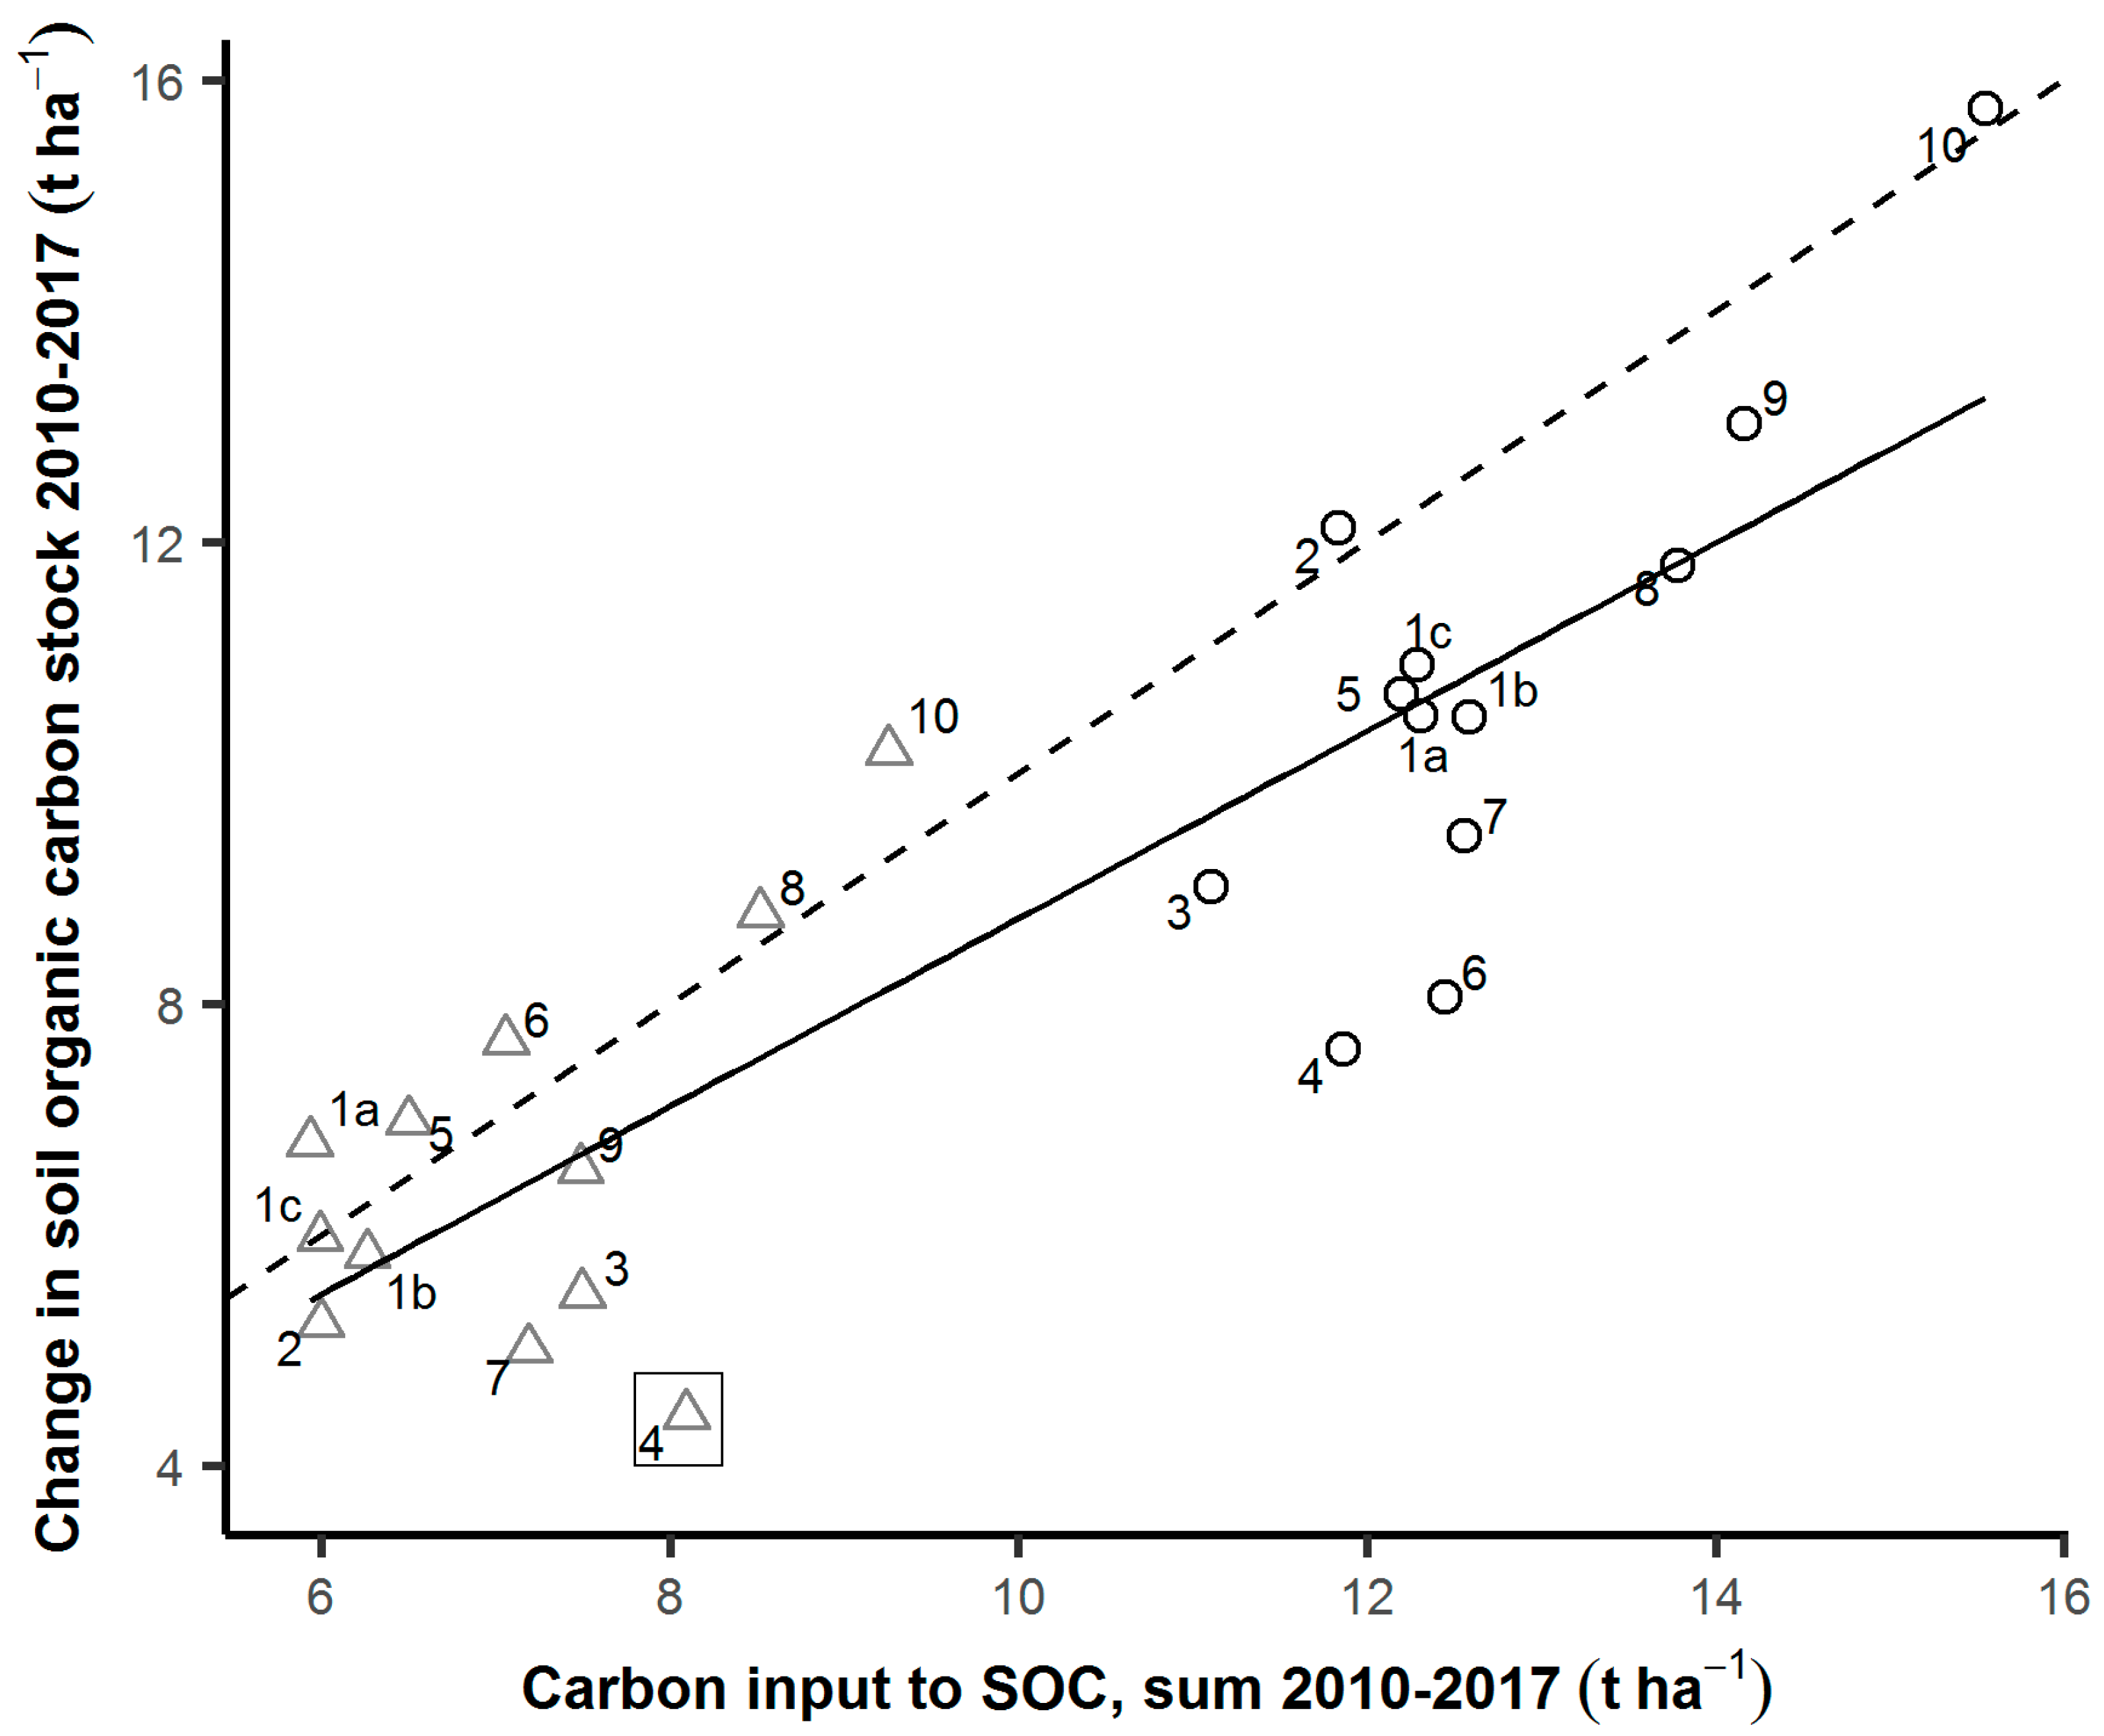 Agronomy | Free Full-Text | Effects of Organic Energy Crop Rotations and  Fertilisation with the Liquid Digestate Phase on Organic Carbon in the  Topsoil | HTML